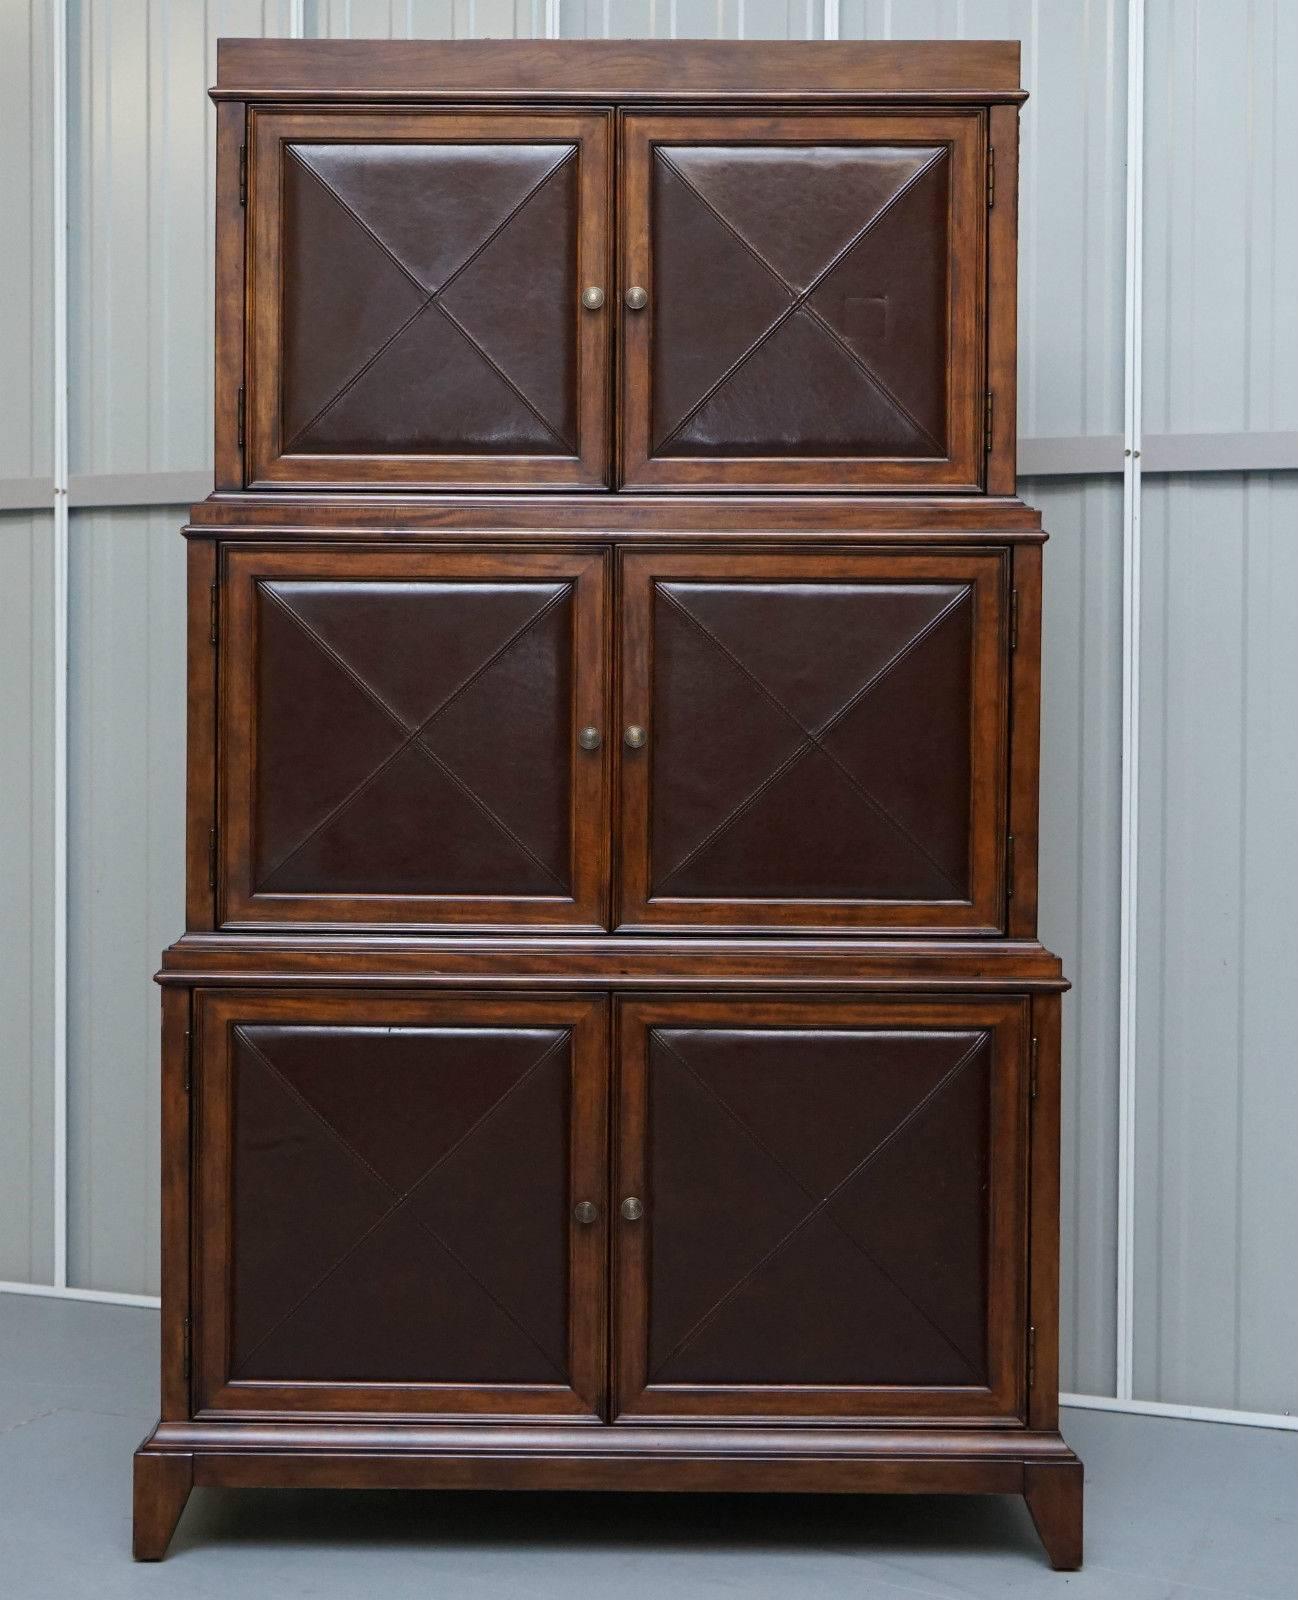 We are delighted to offer for sale this stunning and exceptionally rare hand made to order Bernhardt leather and mahogany entertainment cabinet bookcase

This piece retailed in the high thousands new, it is a genuinely exceptional cabinet

This